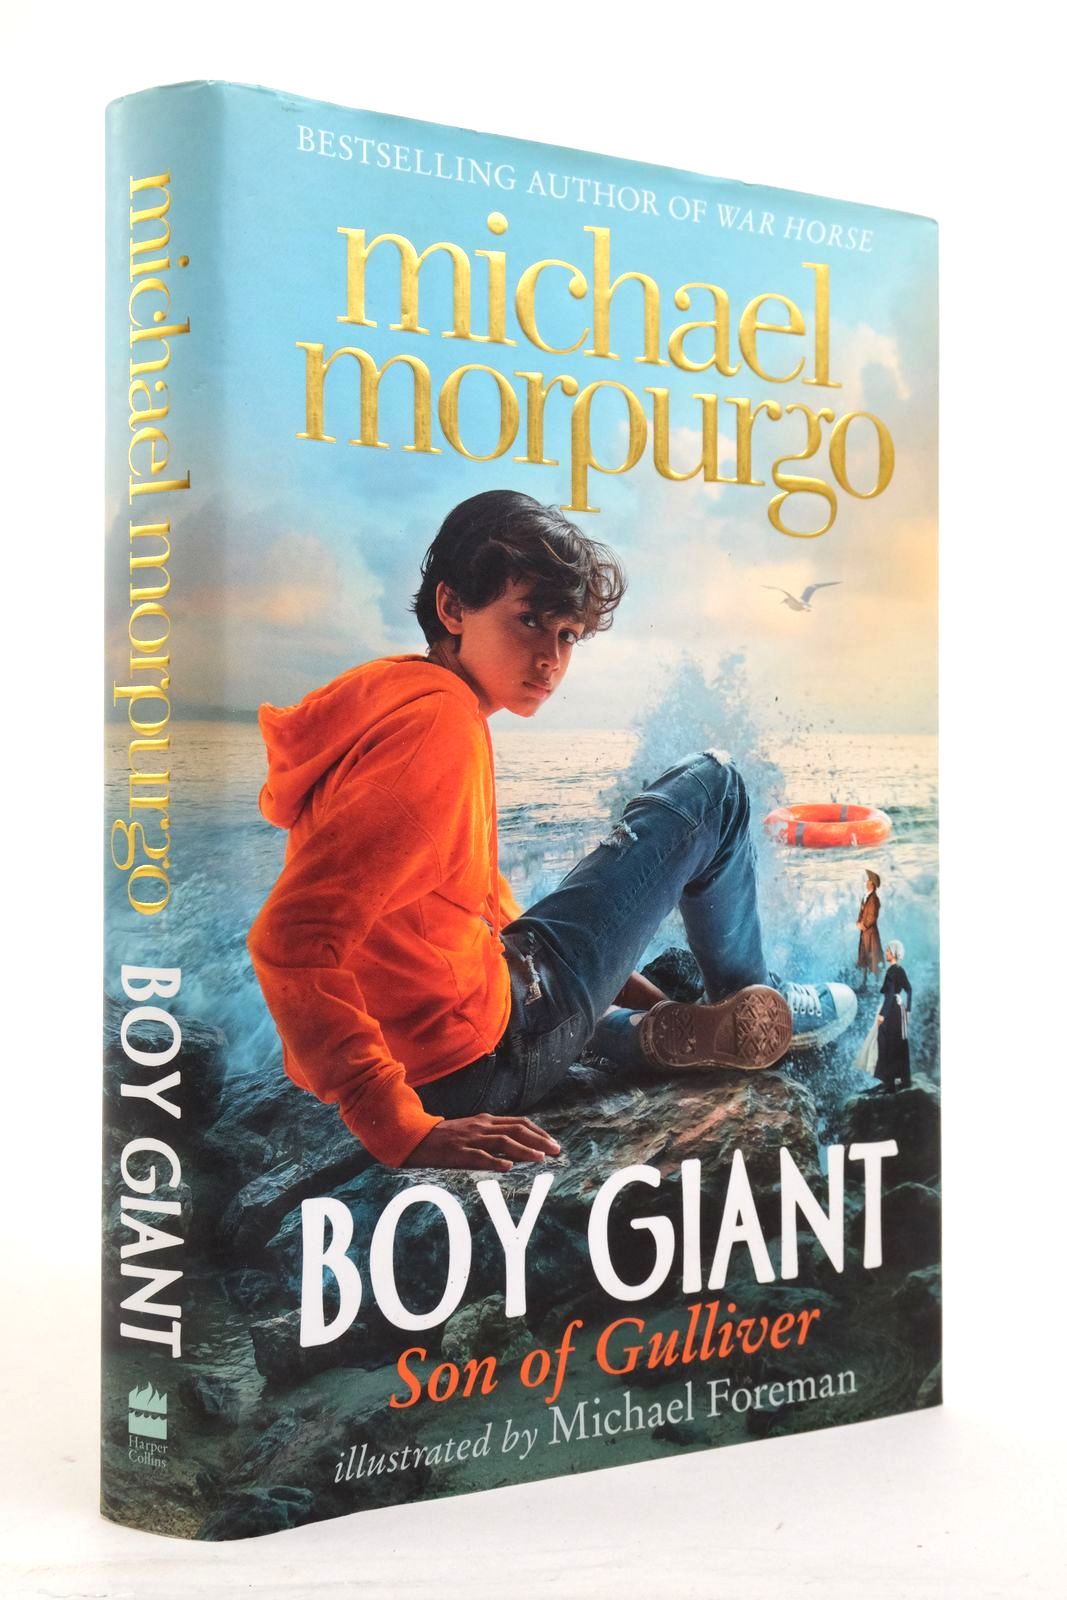 Photo of BOY GIANT: SON OF GULLIVER written by Morpurgo, Michael illustrated by Foreman, Michael published by Harper Collins Childrens Books (STOCK CODE: 2137776)  for sale by Stella & Rose's Books